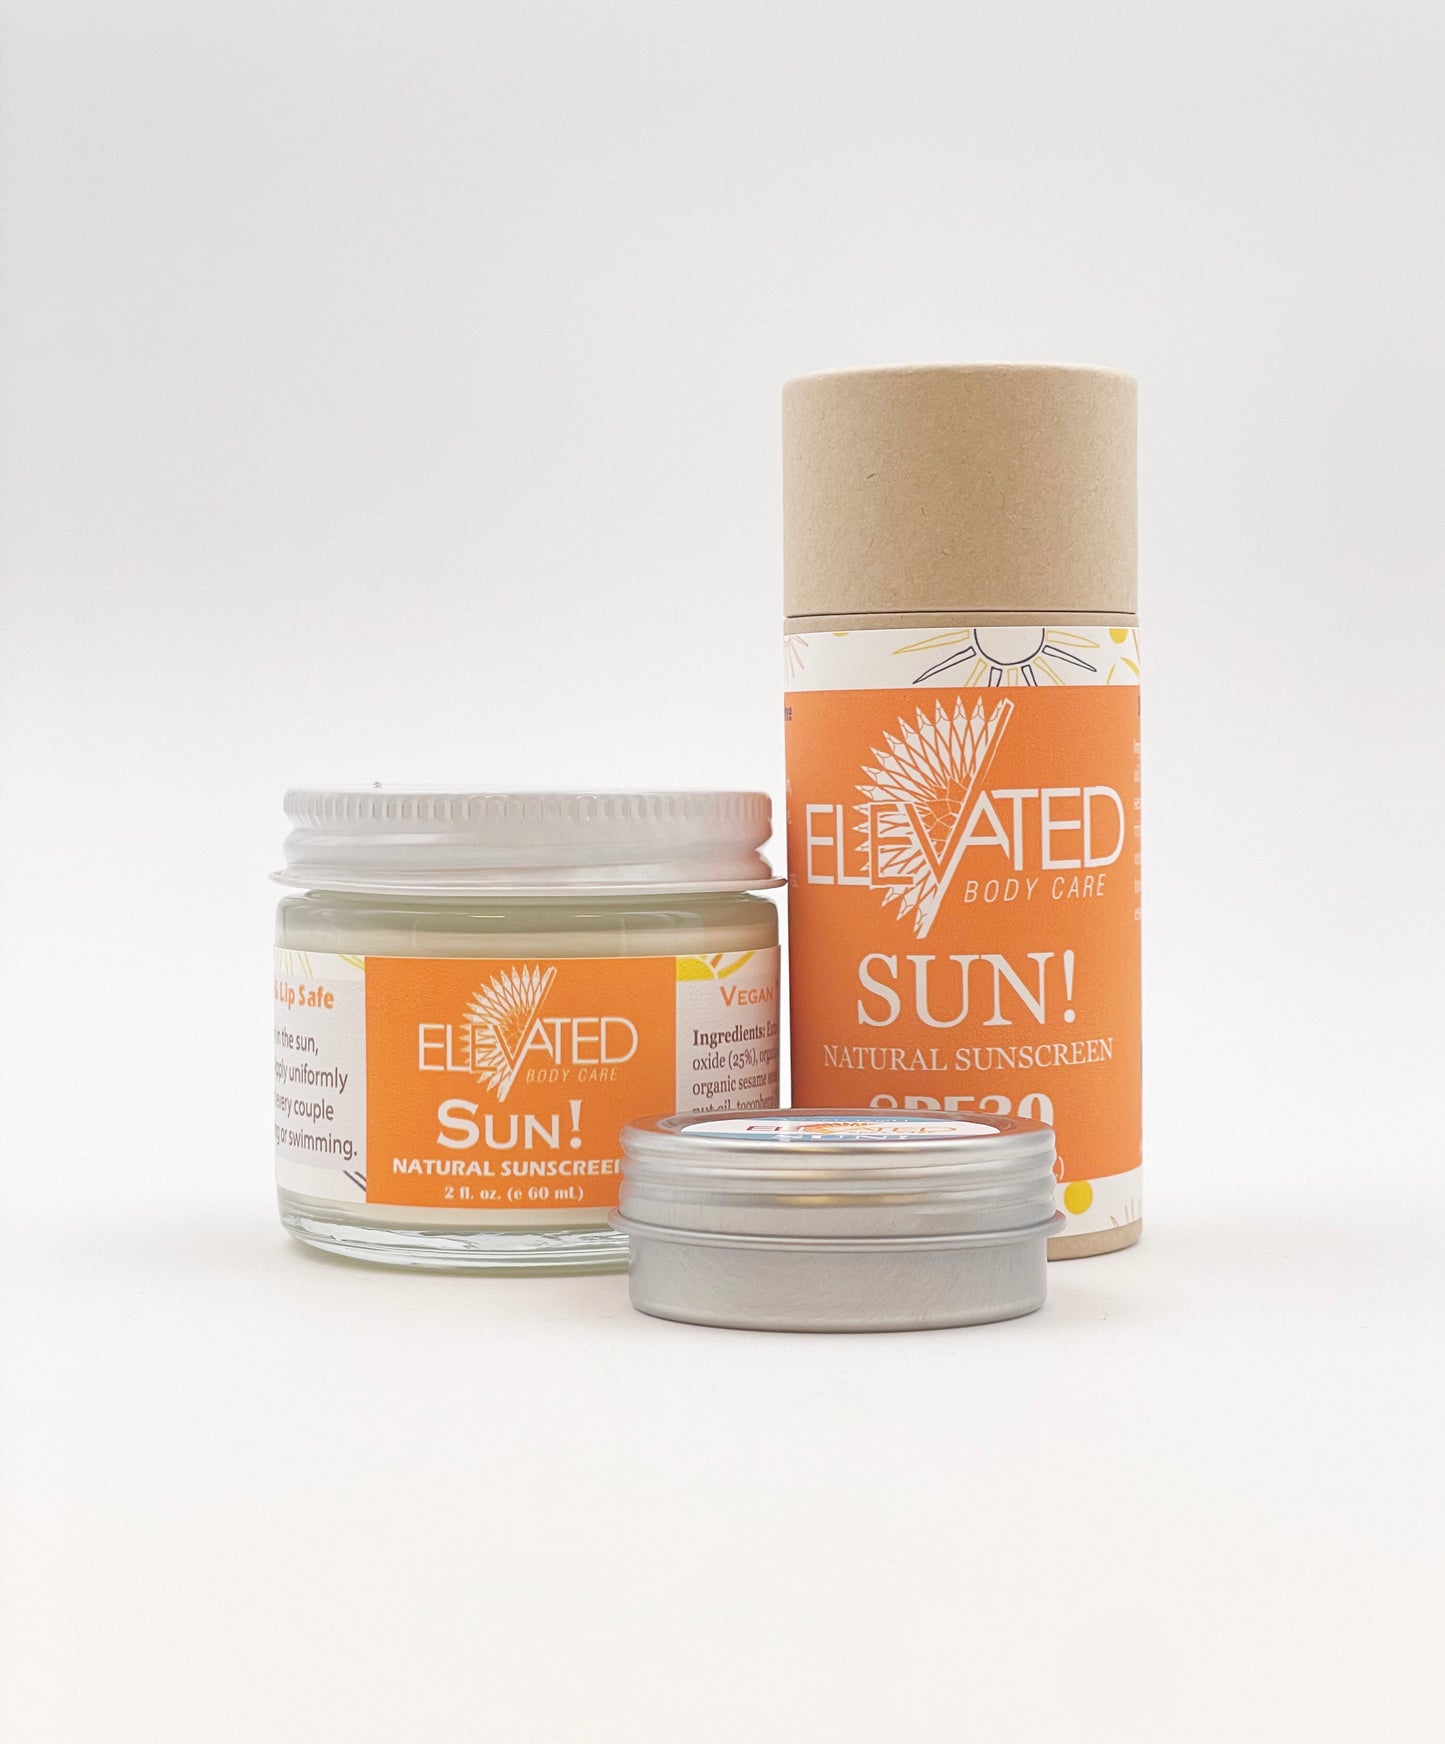 ELEVATED - SUN!  Natural SunScreen - SAMPLE SIZE